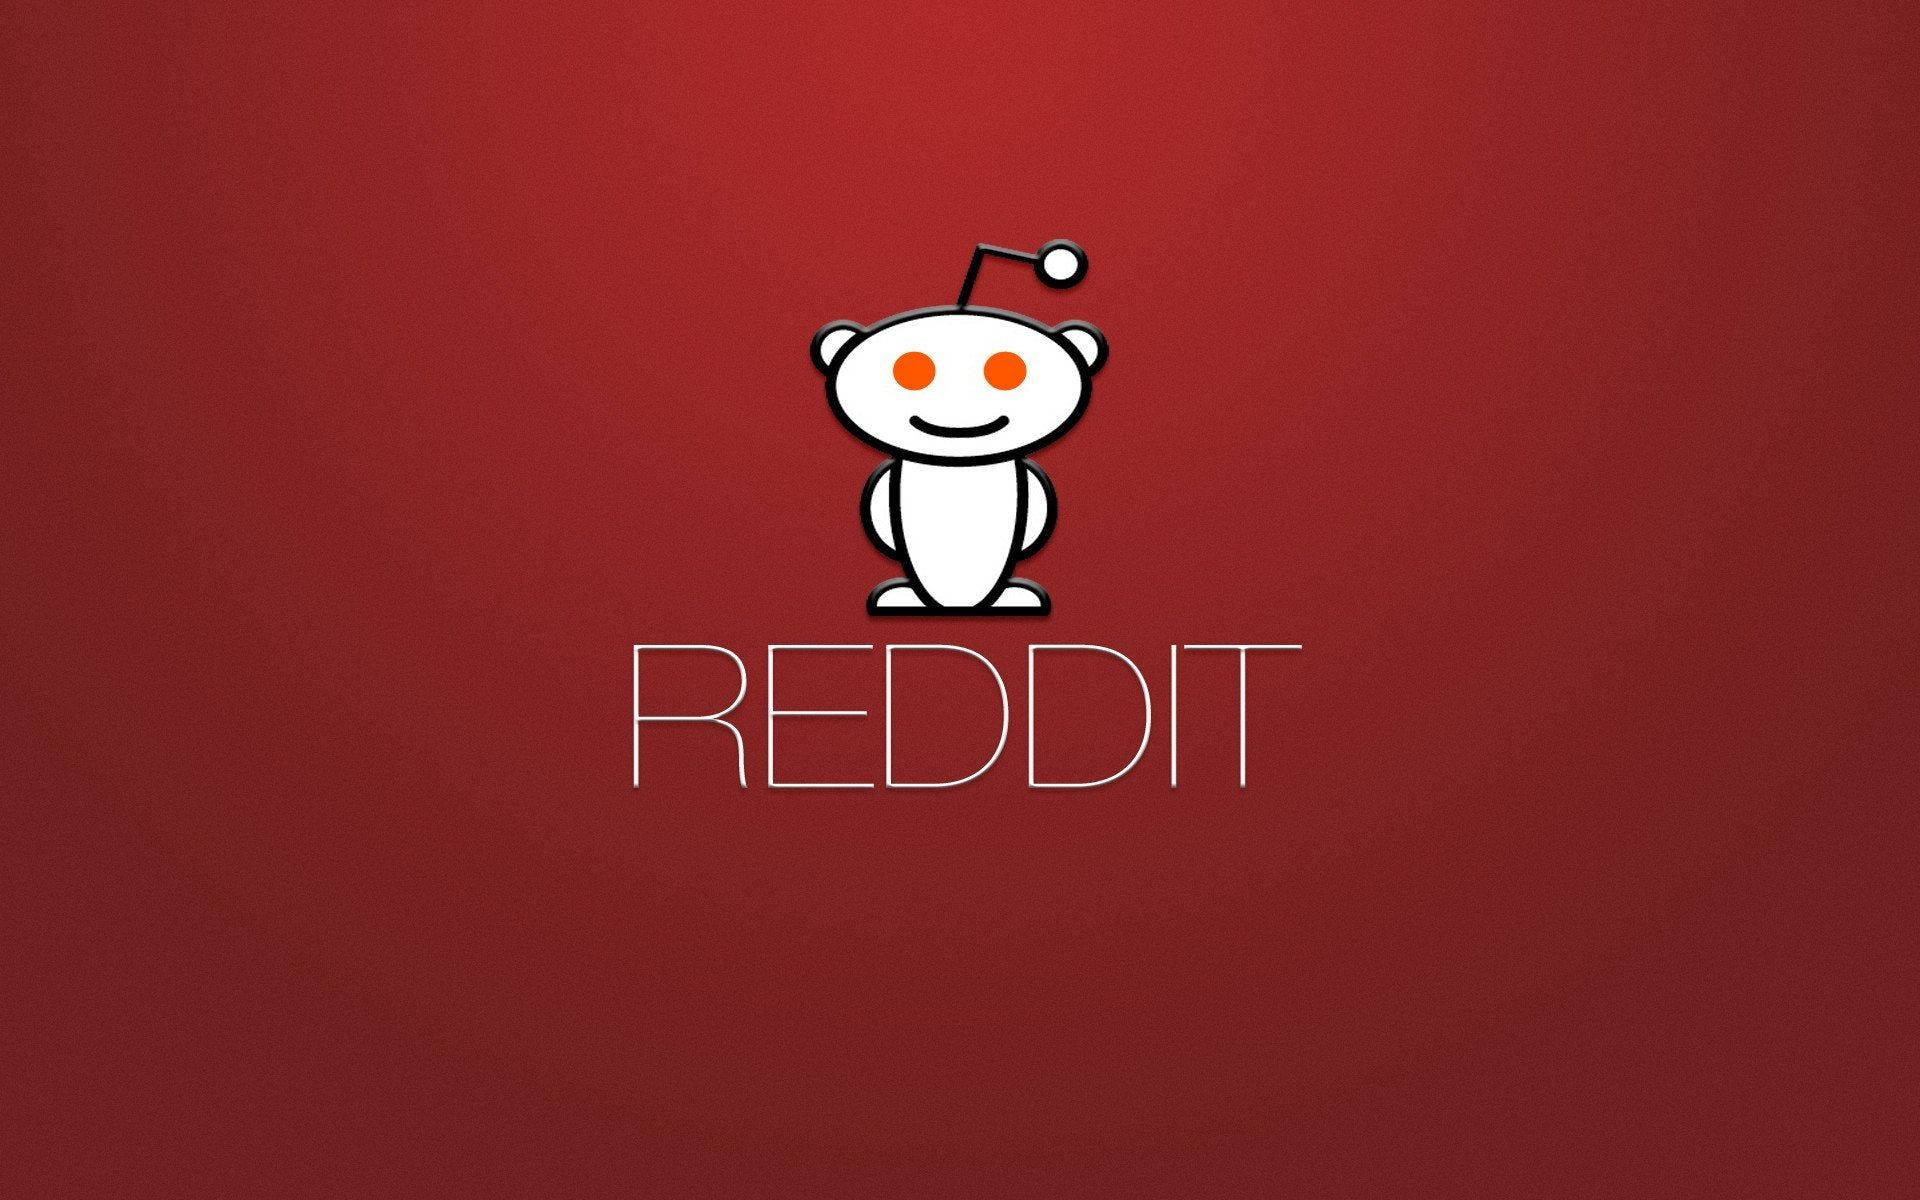 Red Reddit Logo And Title